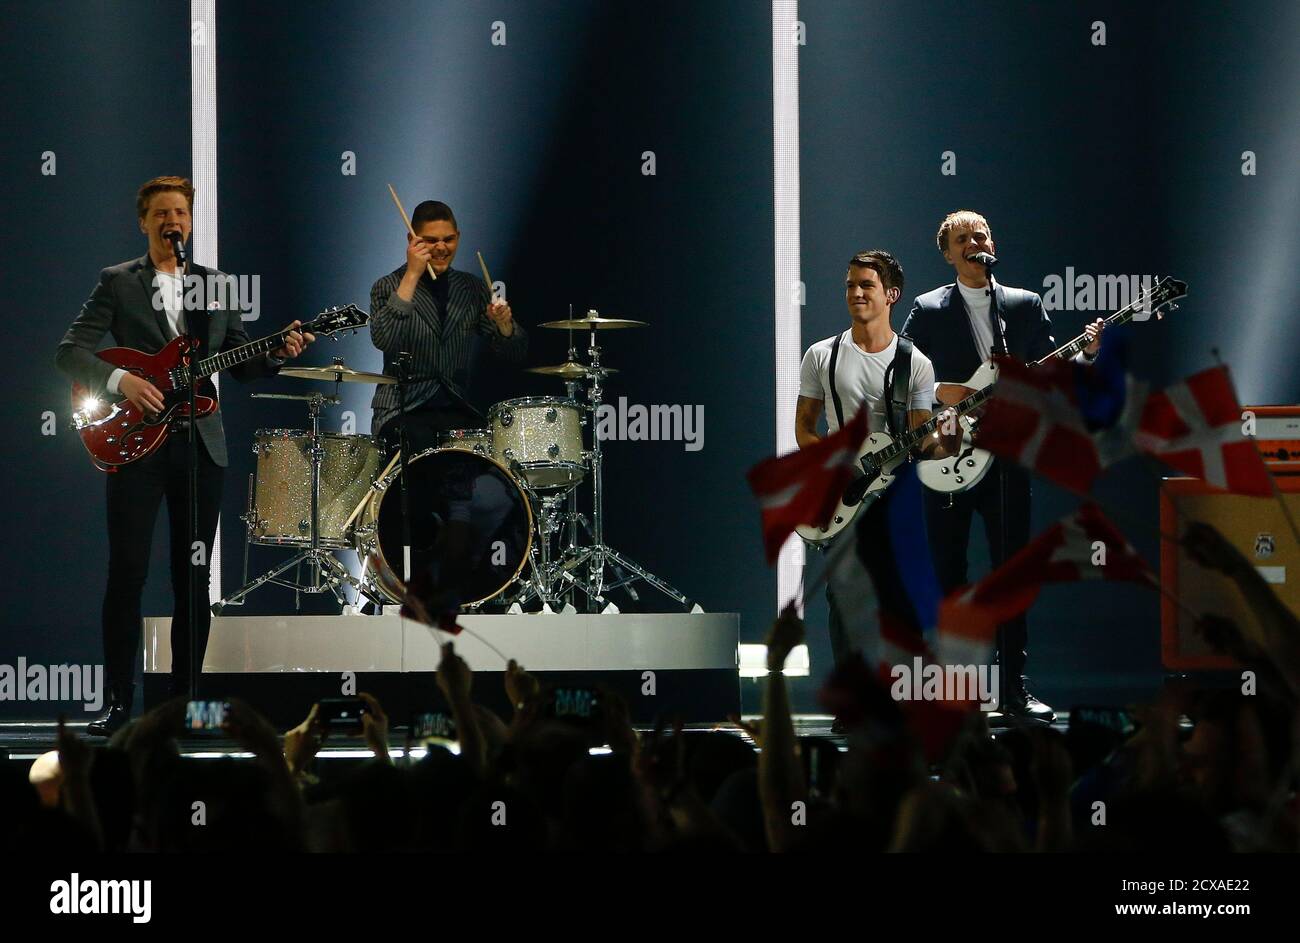 The band Anti Social Media representing Denmark performs the song "The Way  You Are" during the dress rehearsal for the first semifinal of the upcoming  60th annual Eurovision Song Contest In Vienna,